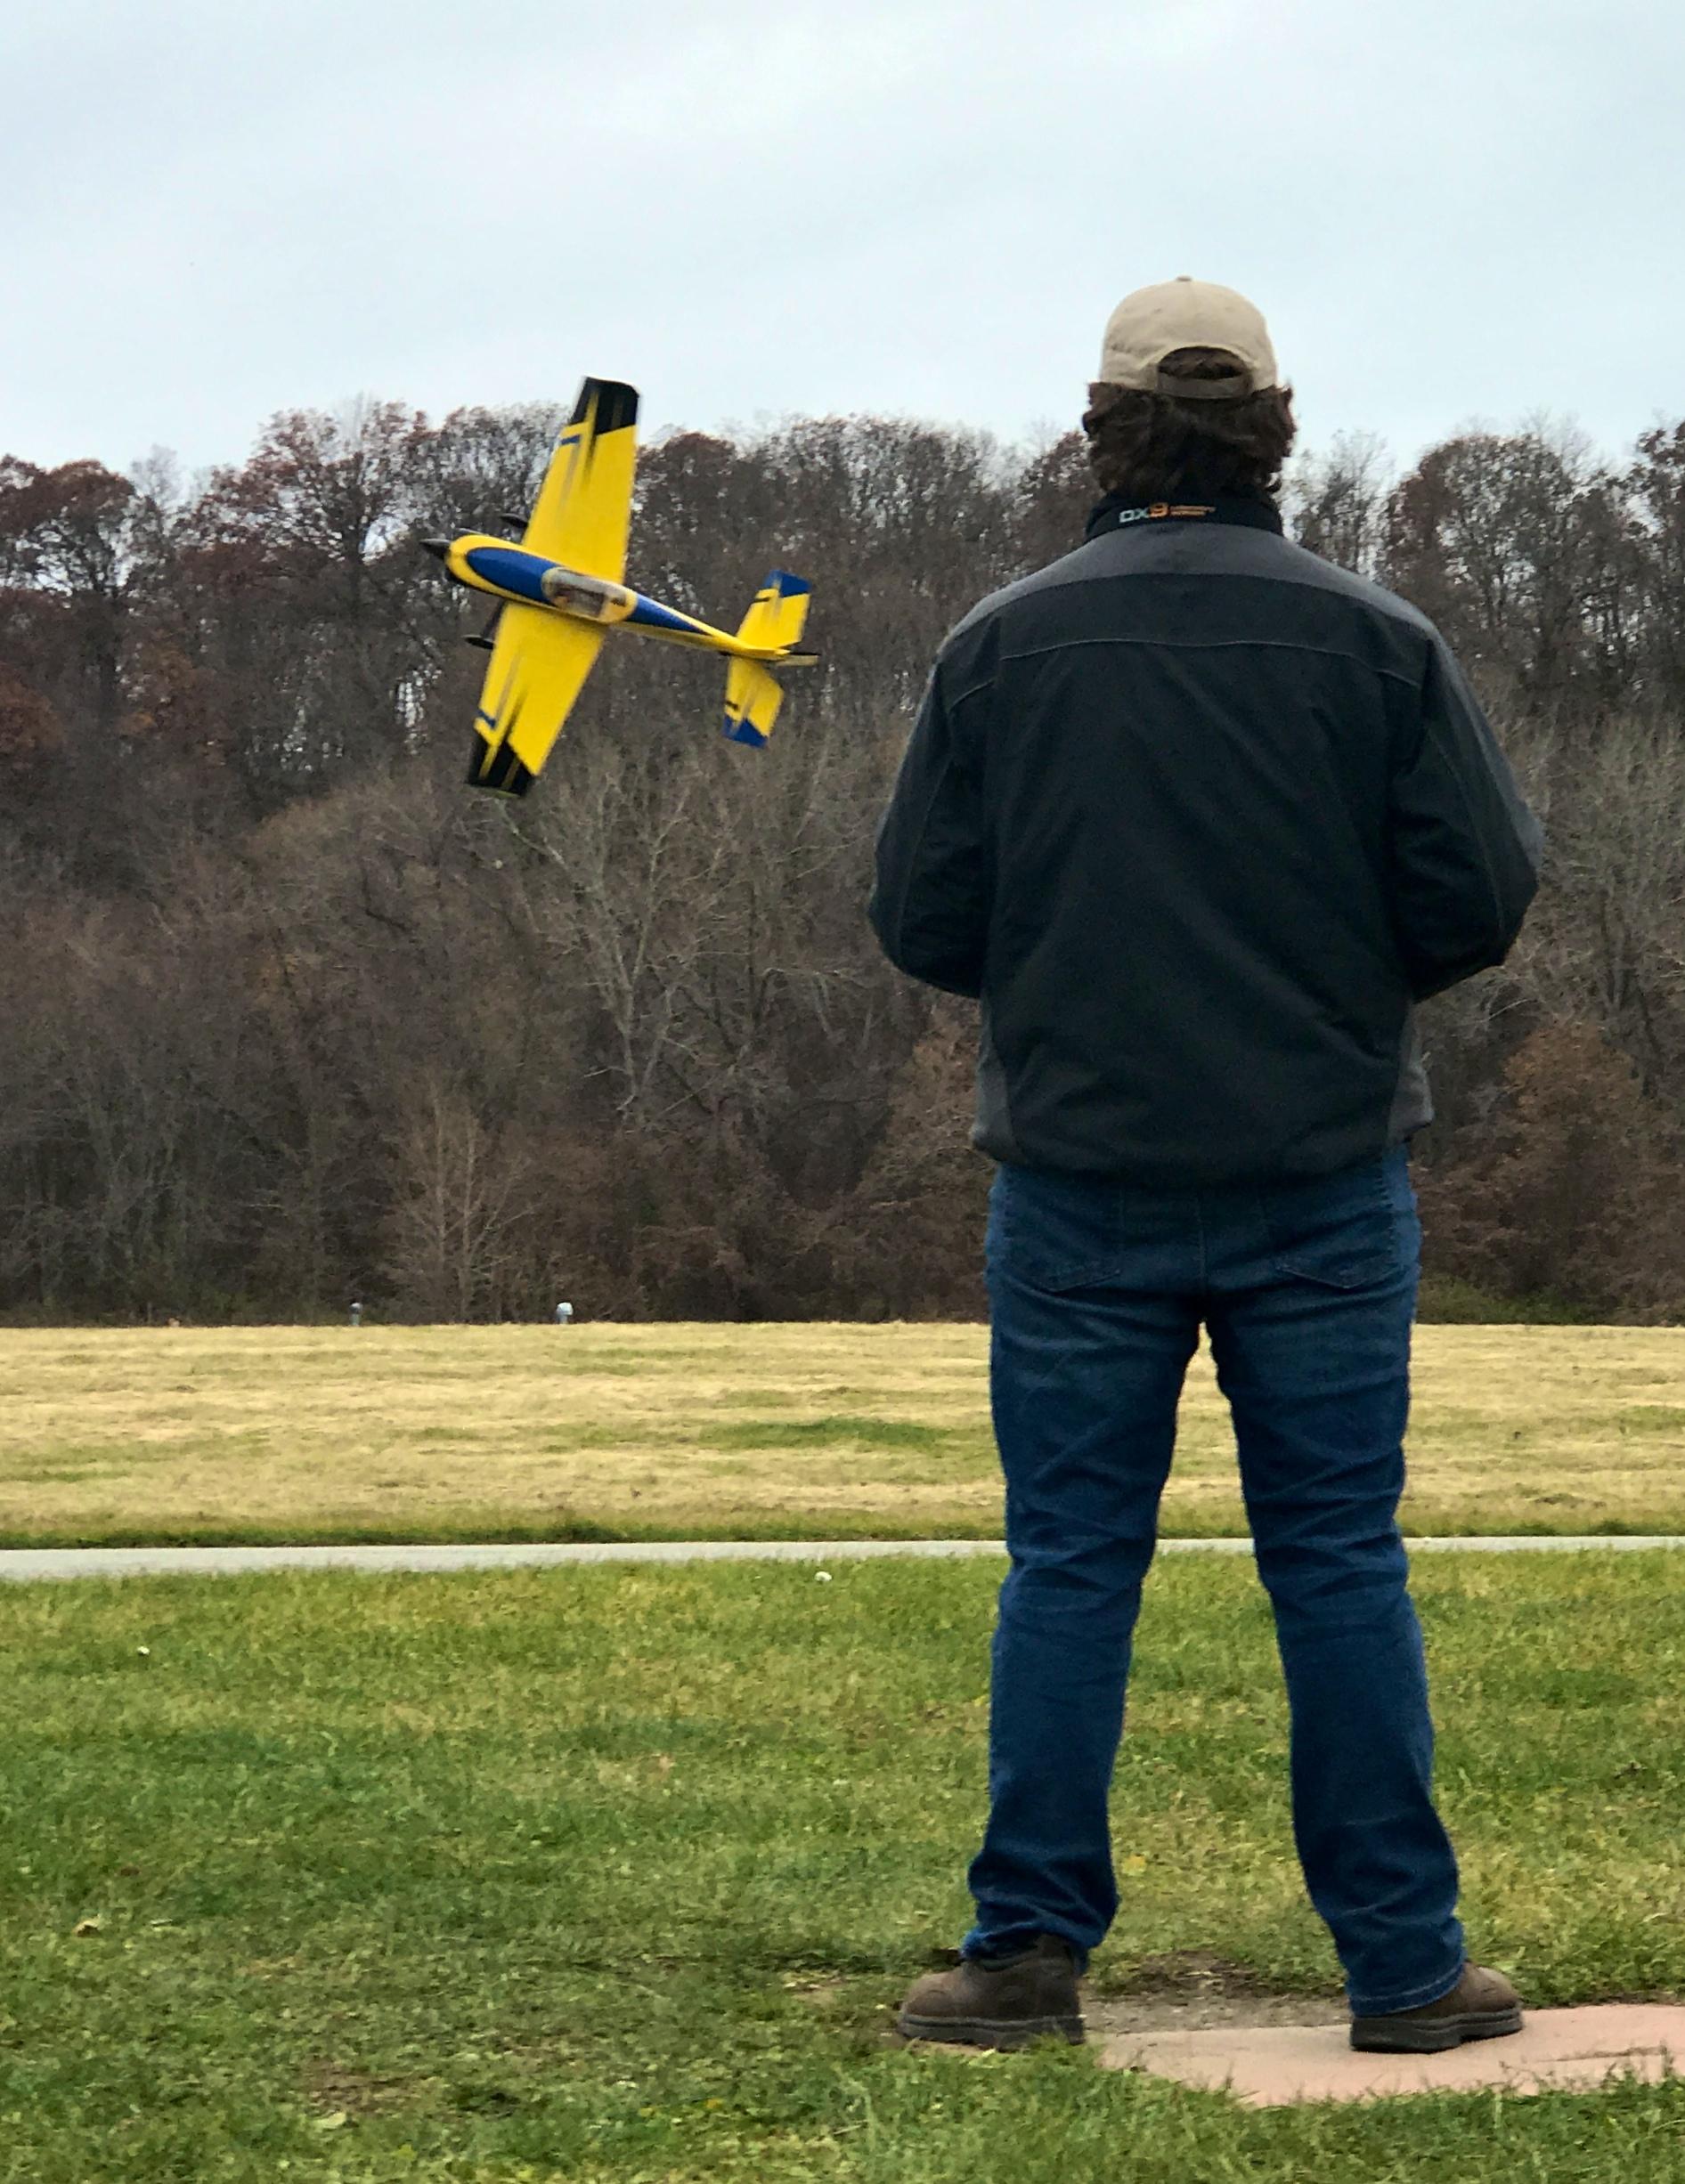 Long Range Rc Plane With Camera: Design and materials play a crucial role in selecting long range RC planes with camera systems.